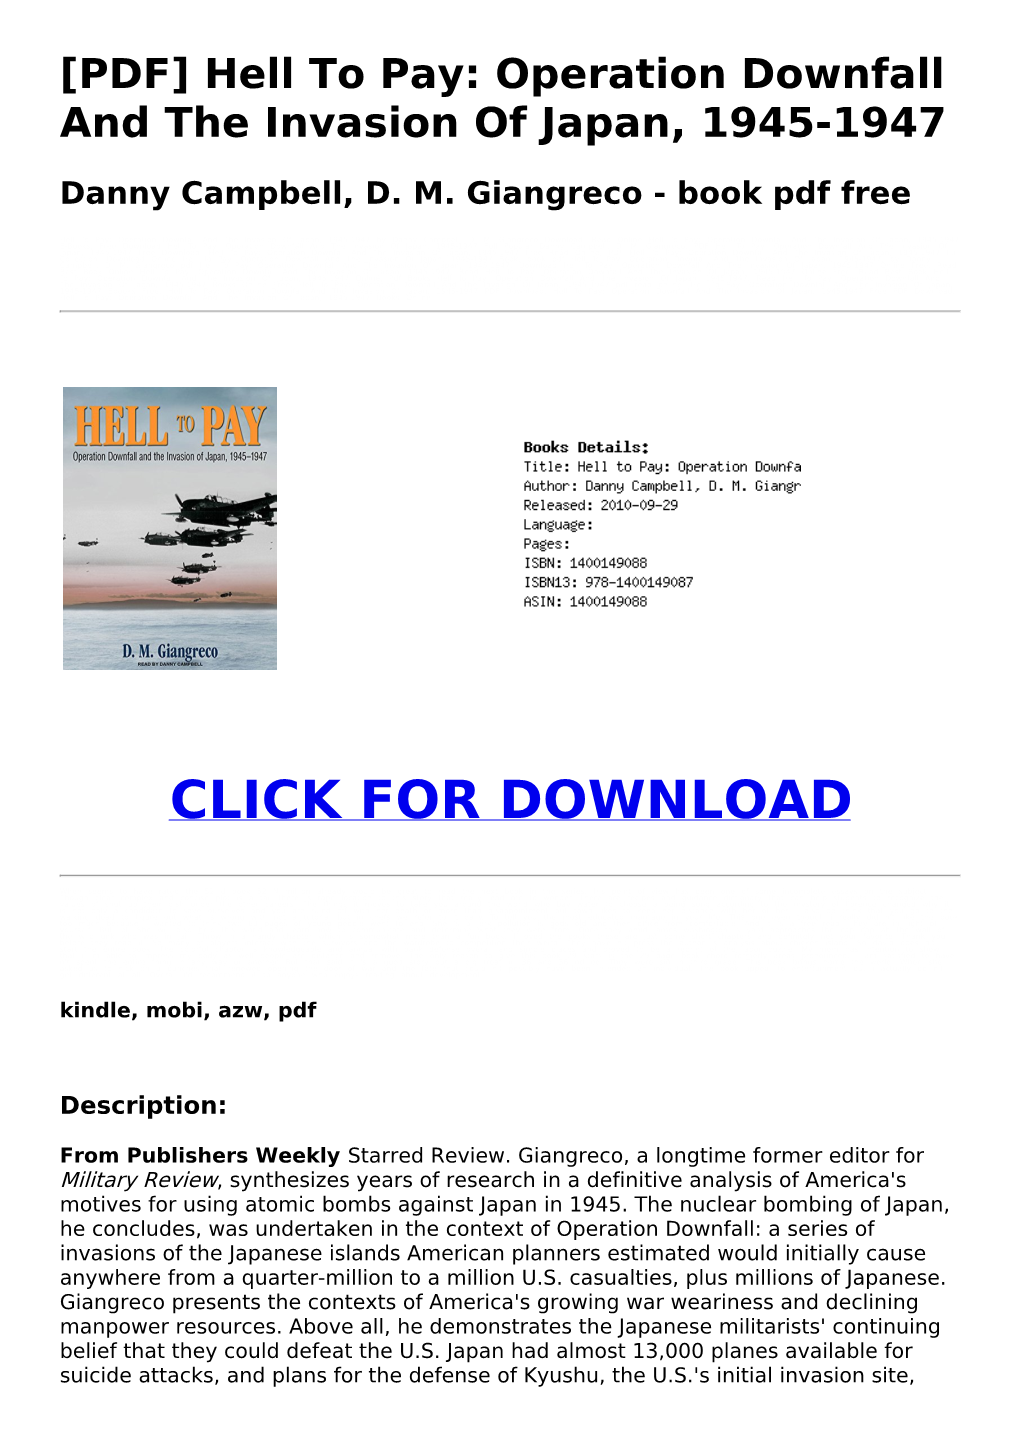 48C2958 [PDF] Hell to Pay: Operation Downfall and the Invasion of Japan, 1945-1947 Danny Campbell, DM Giangreco